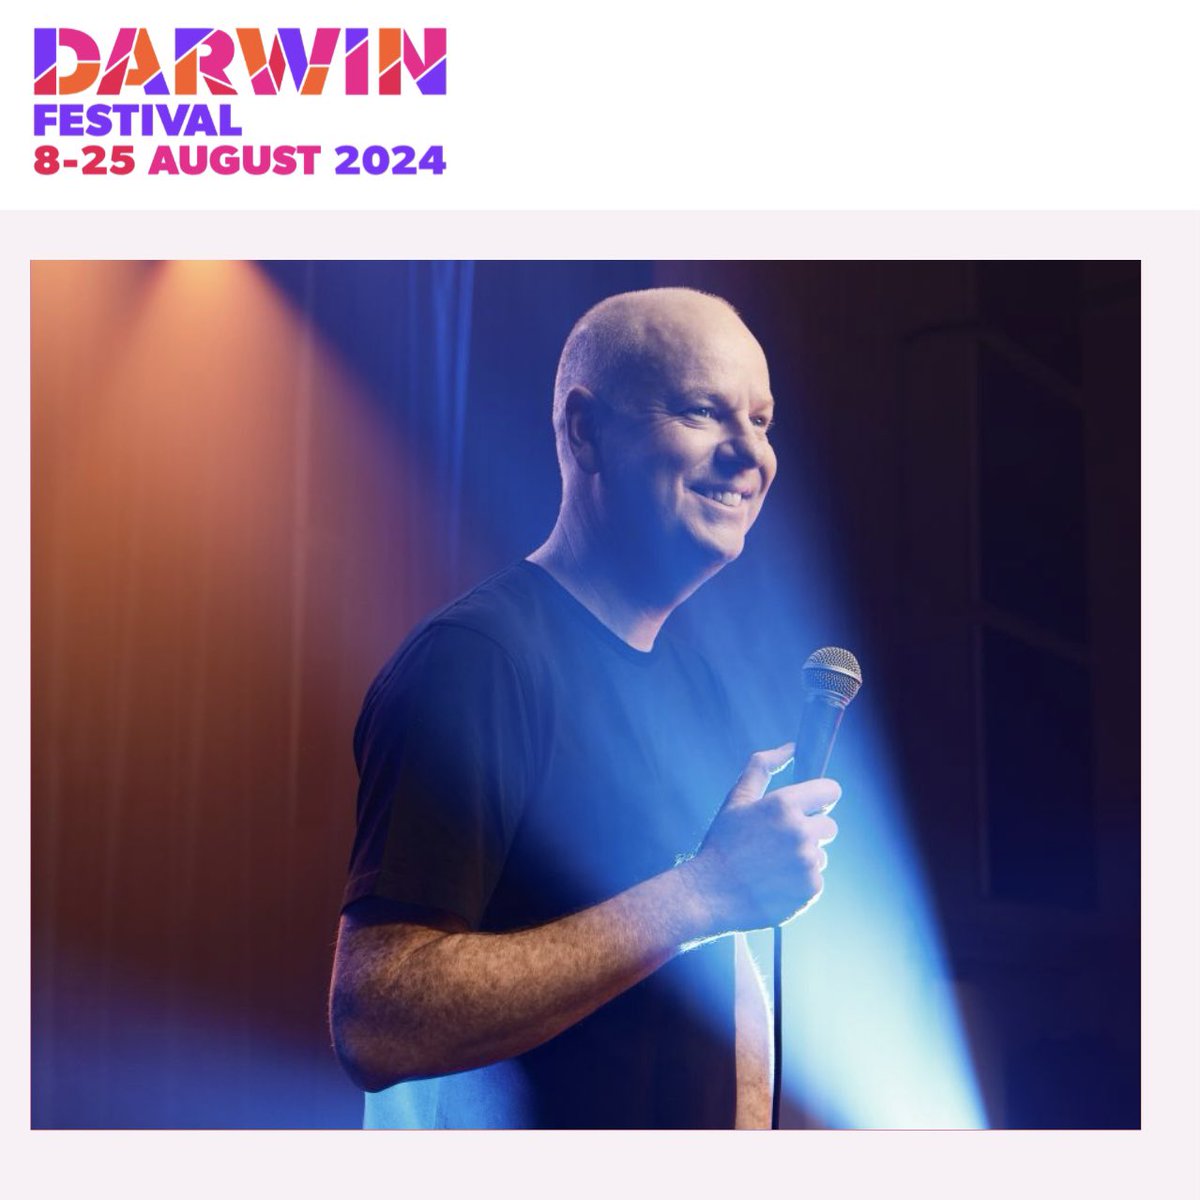 DARWIN! I’m coming back to the festival! This show will sell out. Tix here: darwinfestival.org.au/events/tom-gle…